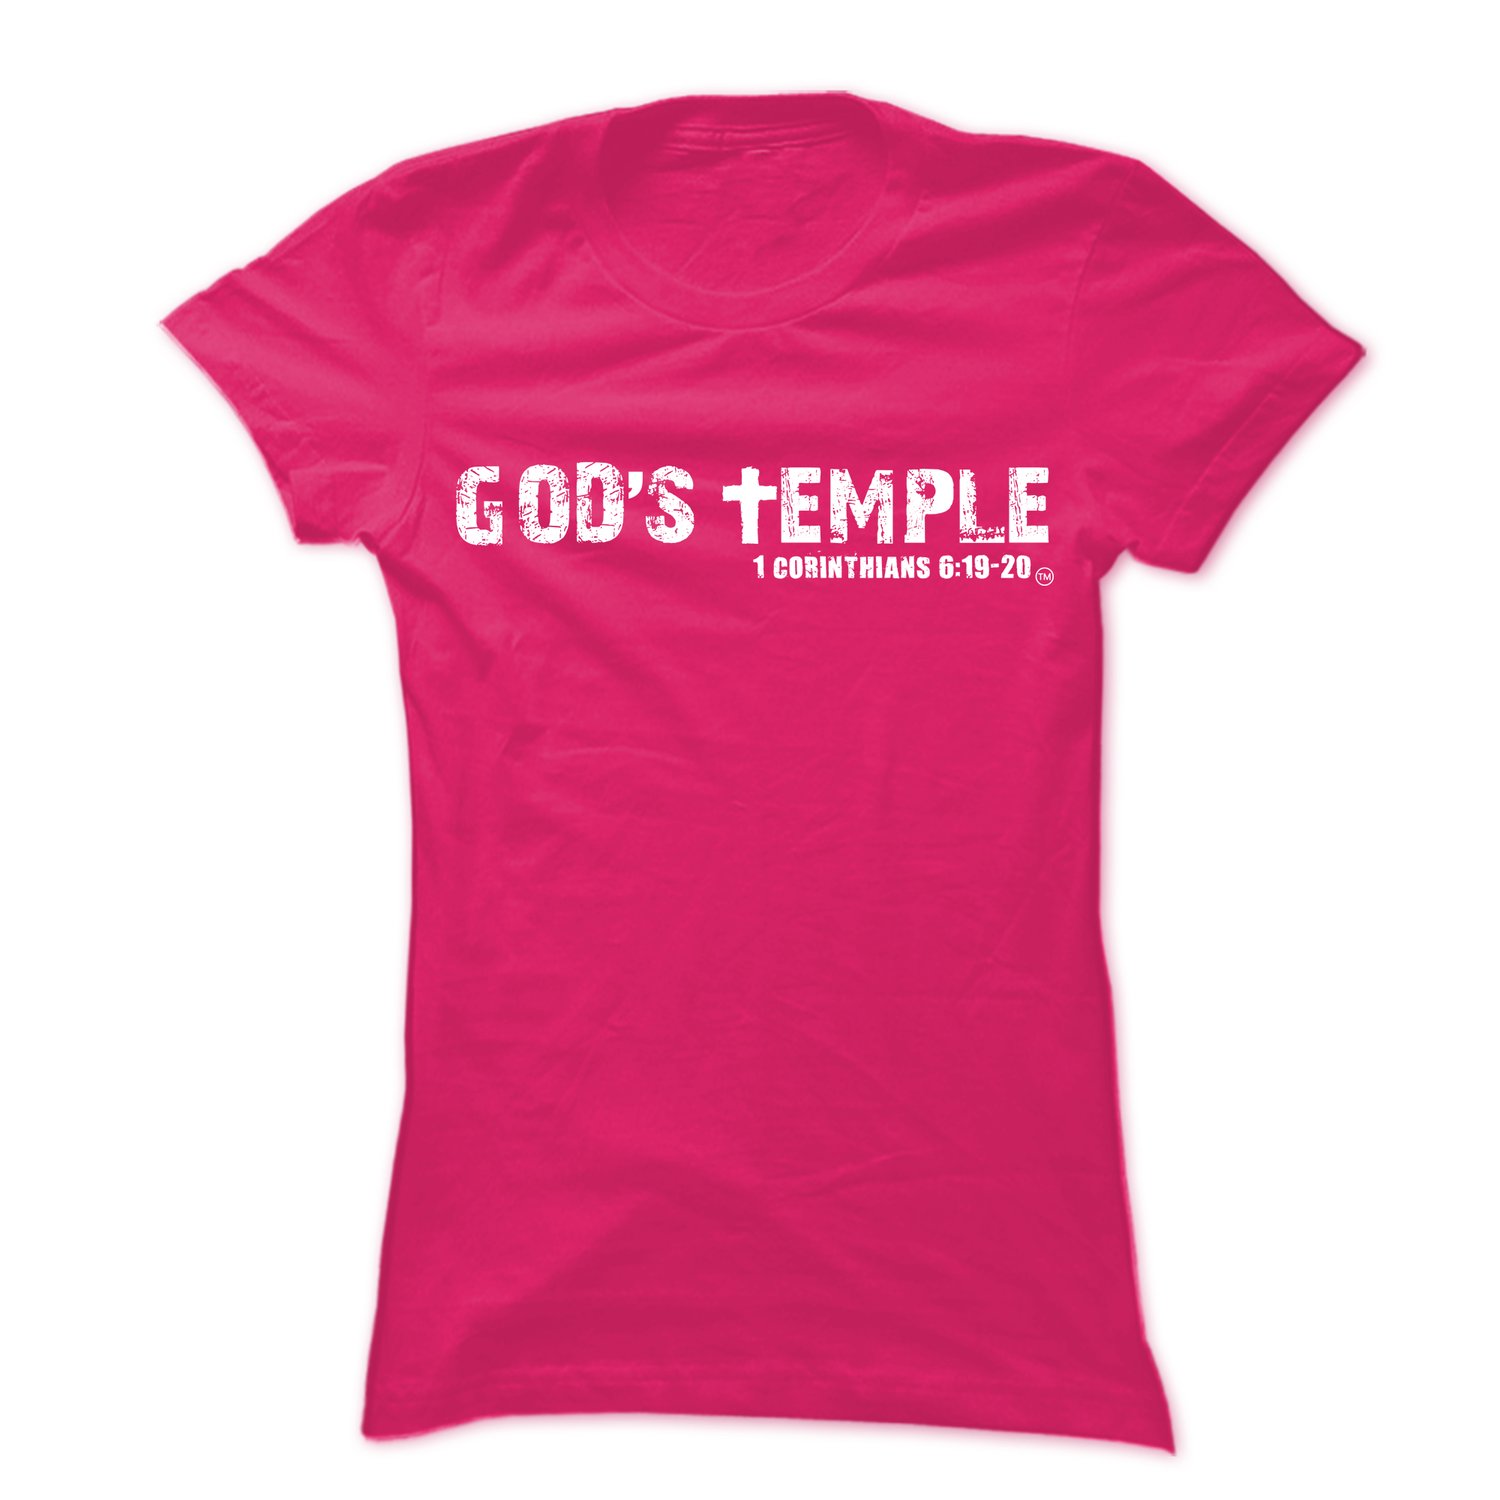 Image of Pink "God's Temple" Unisex Tee